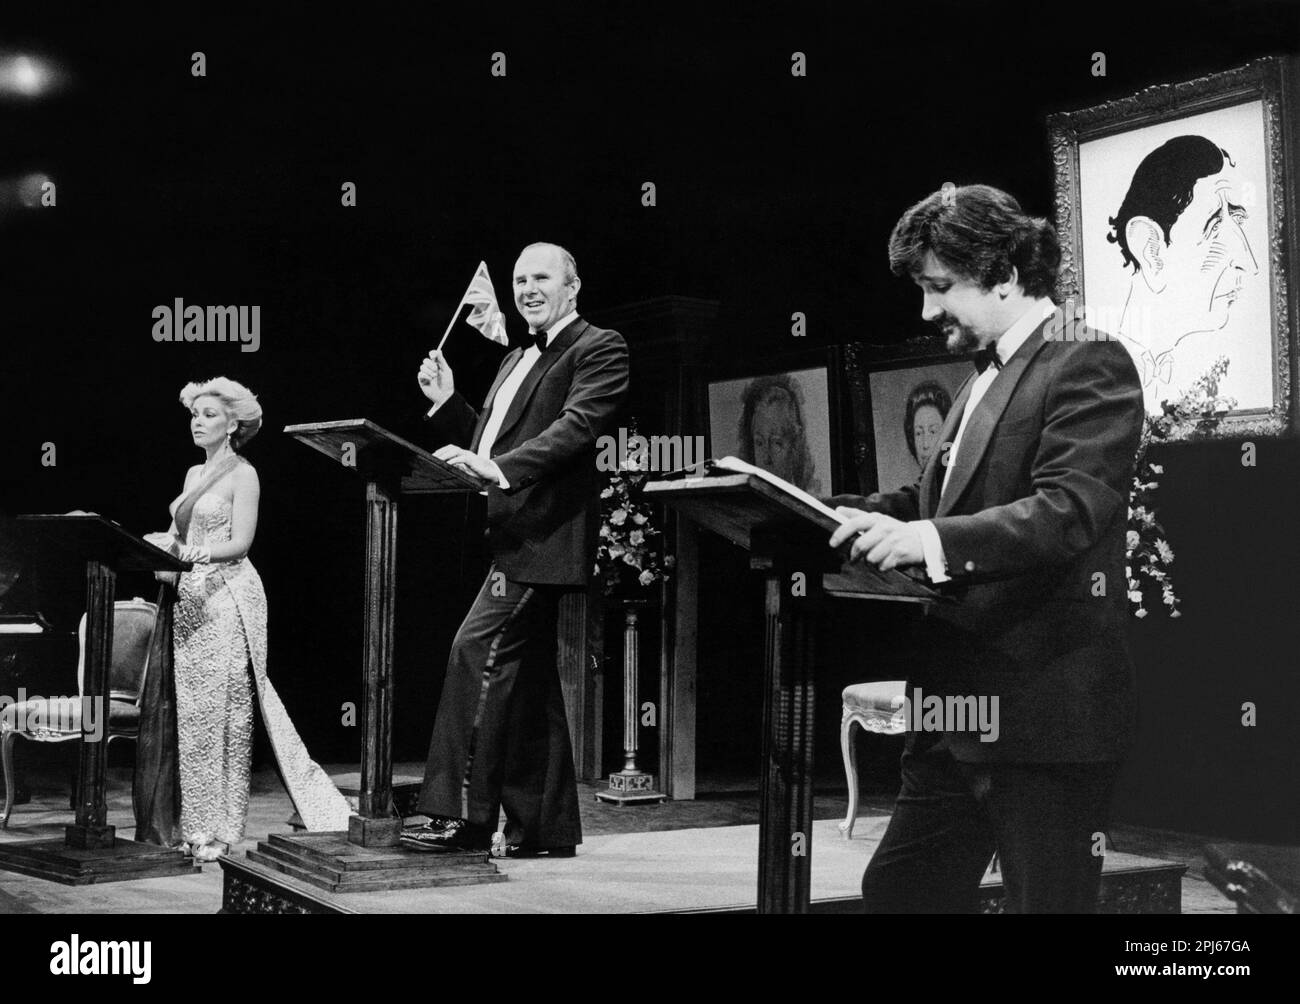 l-r: Pamela Stephenson, Clive James, Russell Davies in CHARLES CHARMING's CHALLENGES ON THE PATHWAY TO THE THRONE von Clive James im Apollo Theatre, London W1 10/06/1981 Design: Roger Glossop Regisseur: Kerry Crabbe Stockfoto